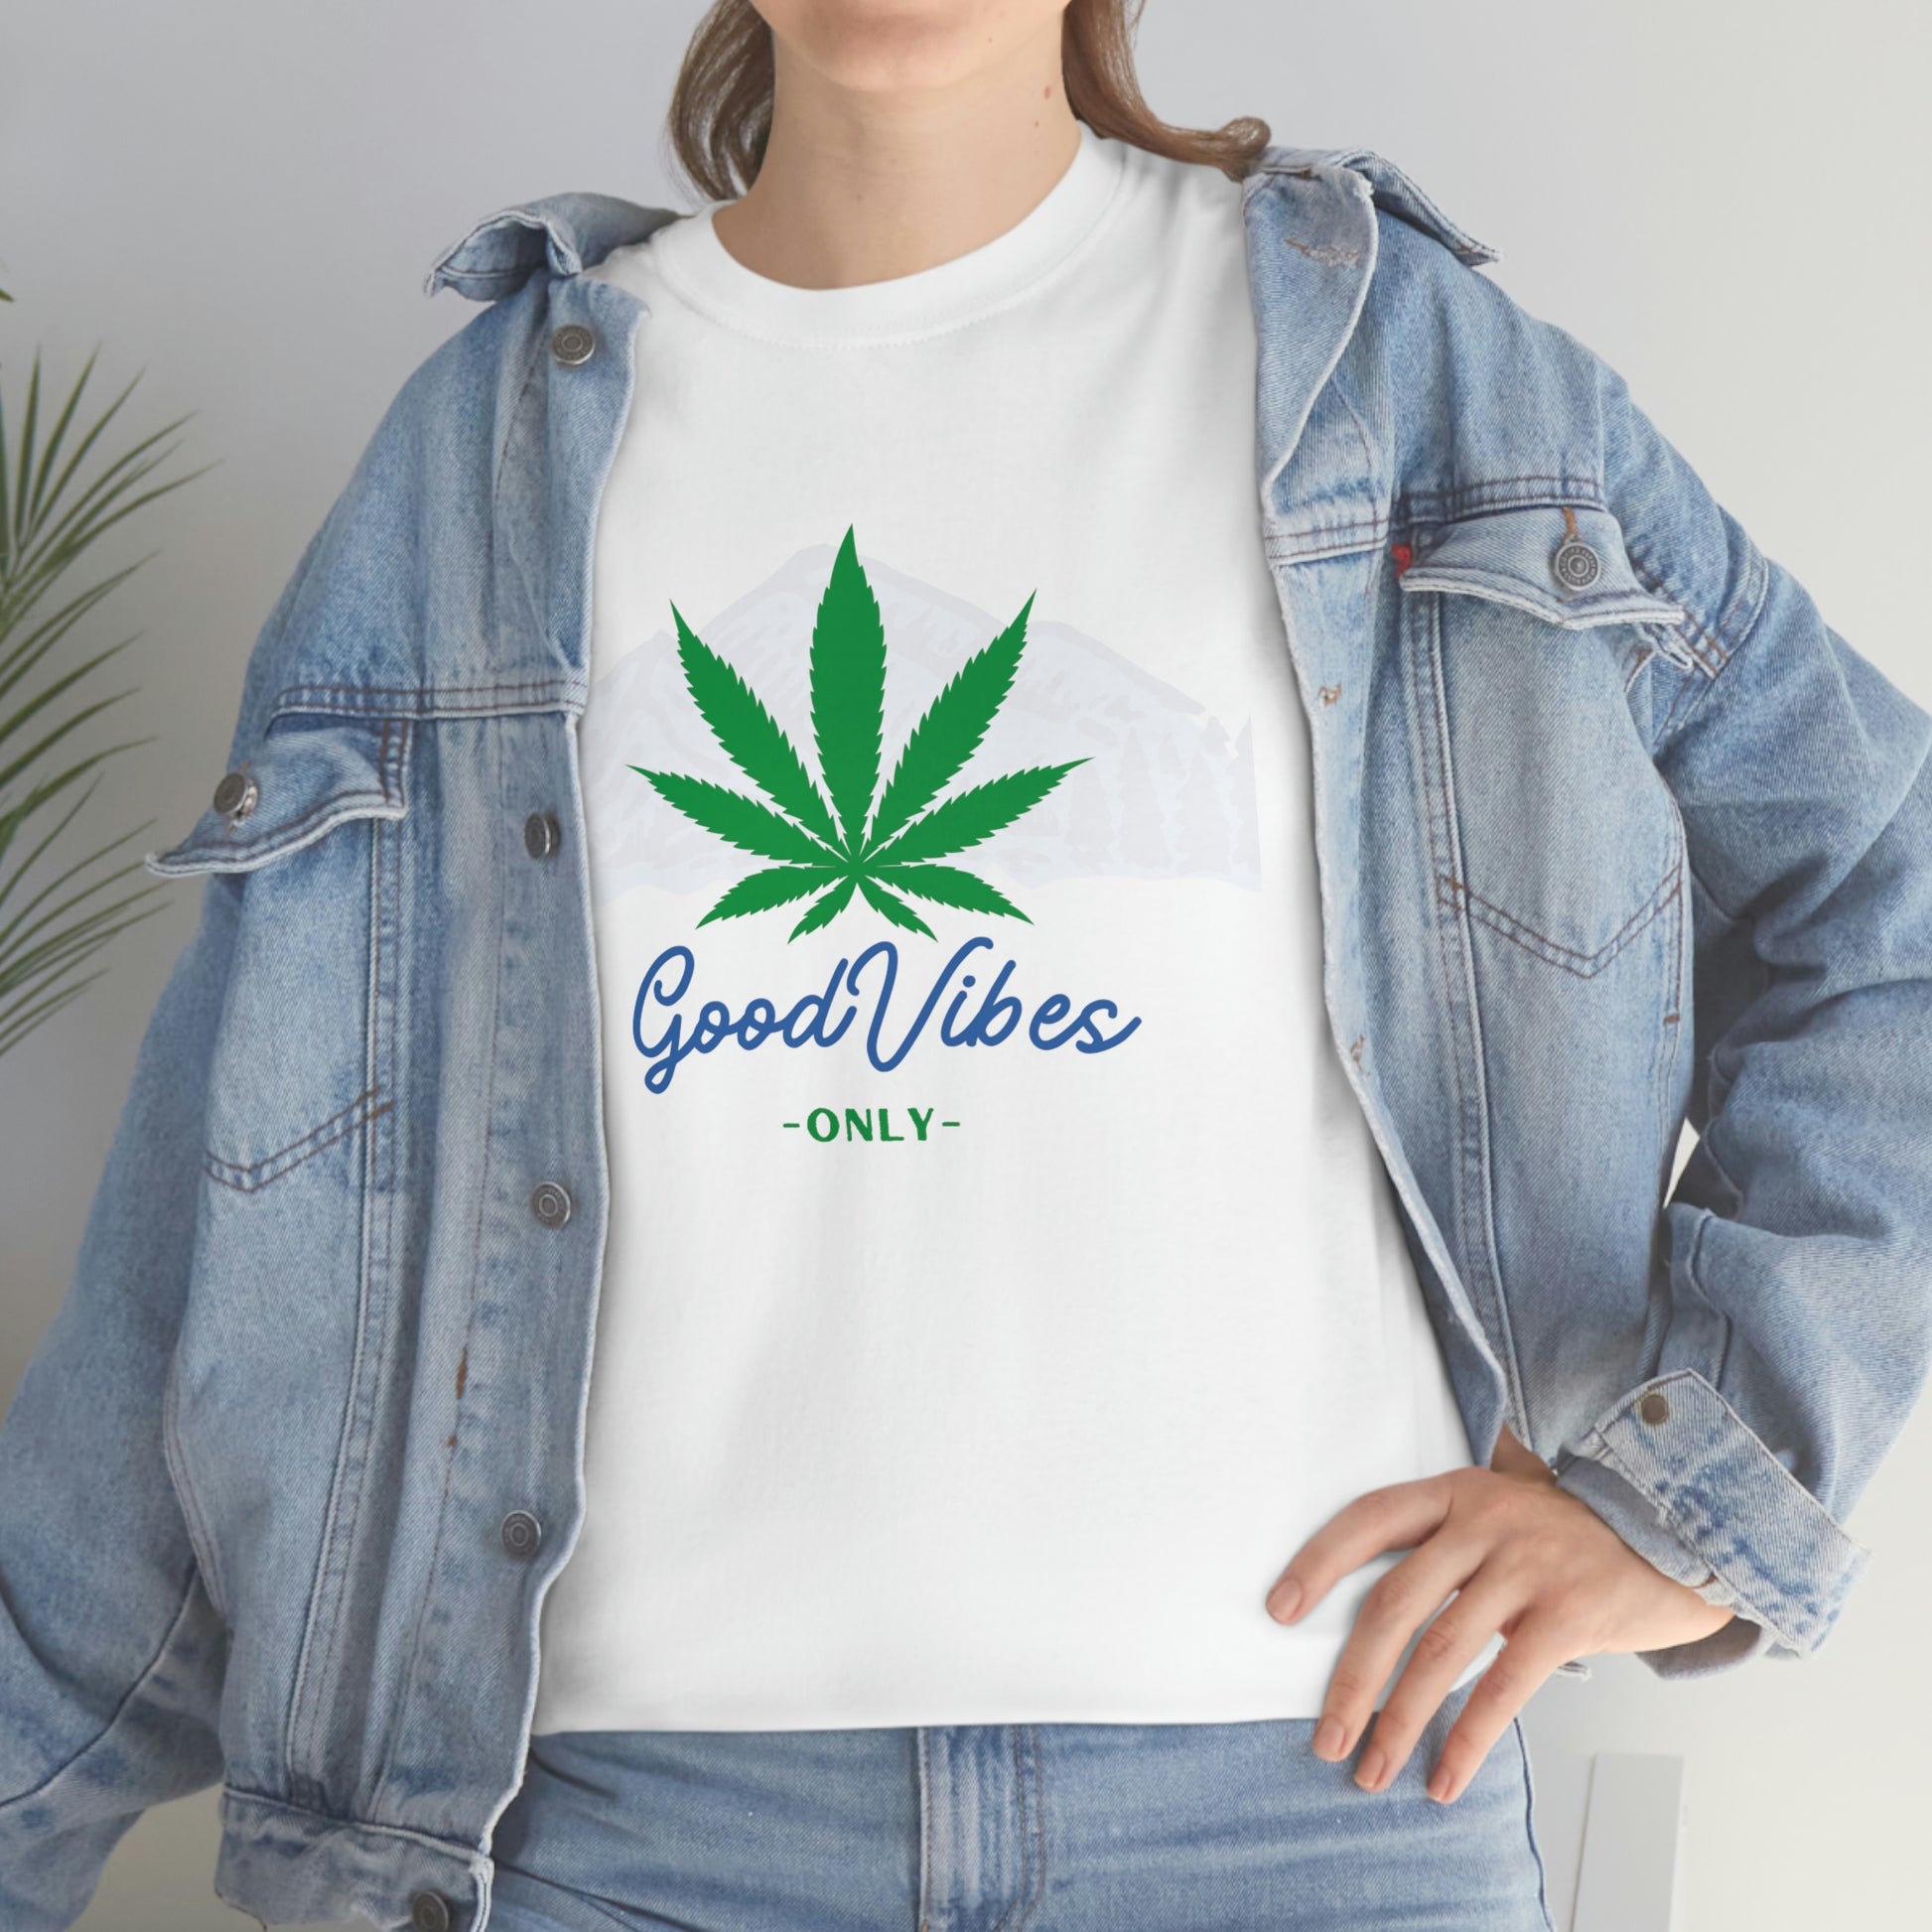 A woman wearing a white t-shirt with the product name "Good Vibes Only Mountain Tee" on it.